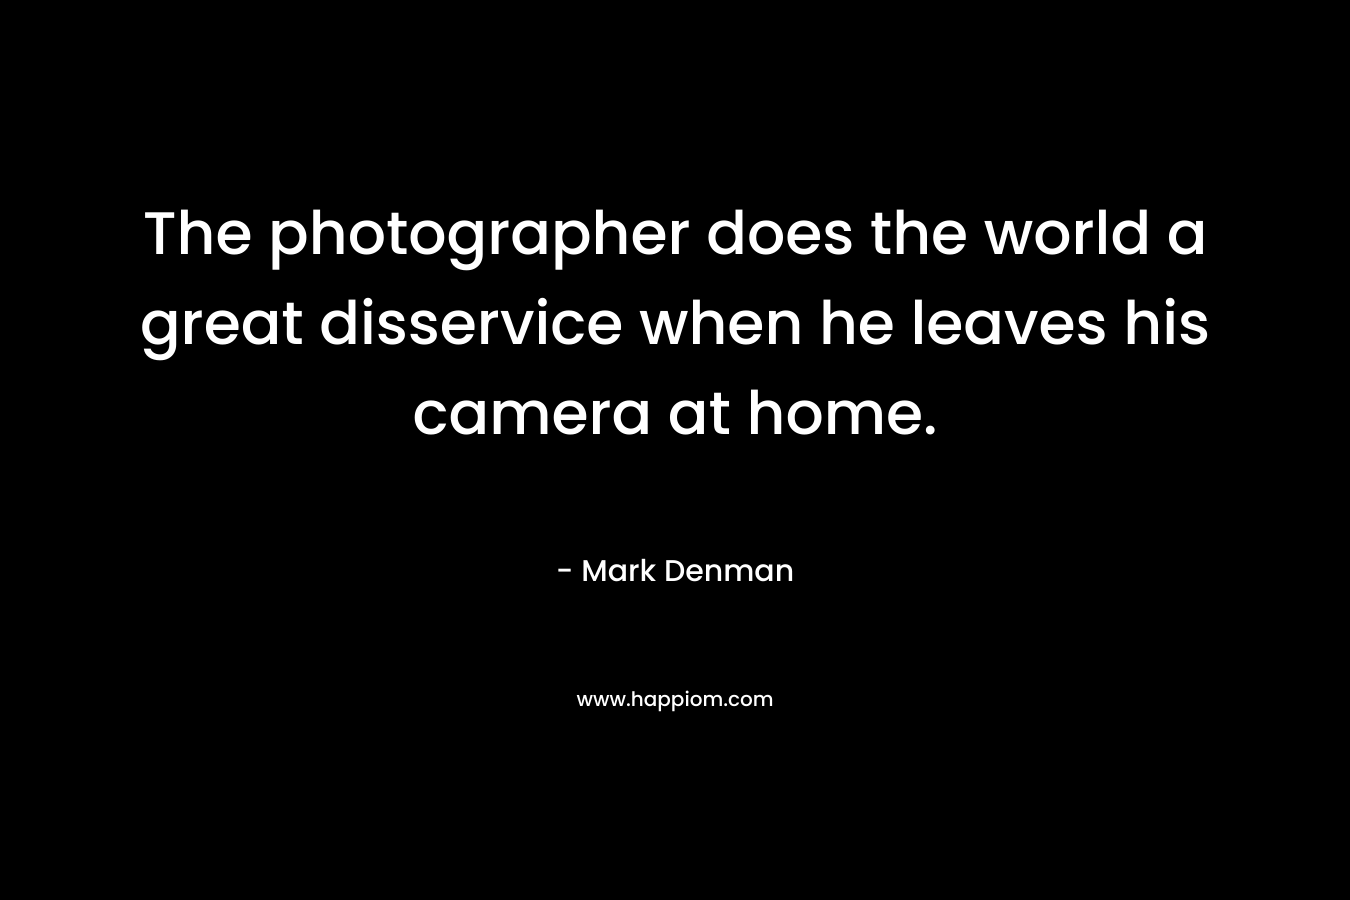 The photographer does the world a great disservice when he leaves his camera at home.